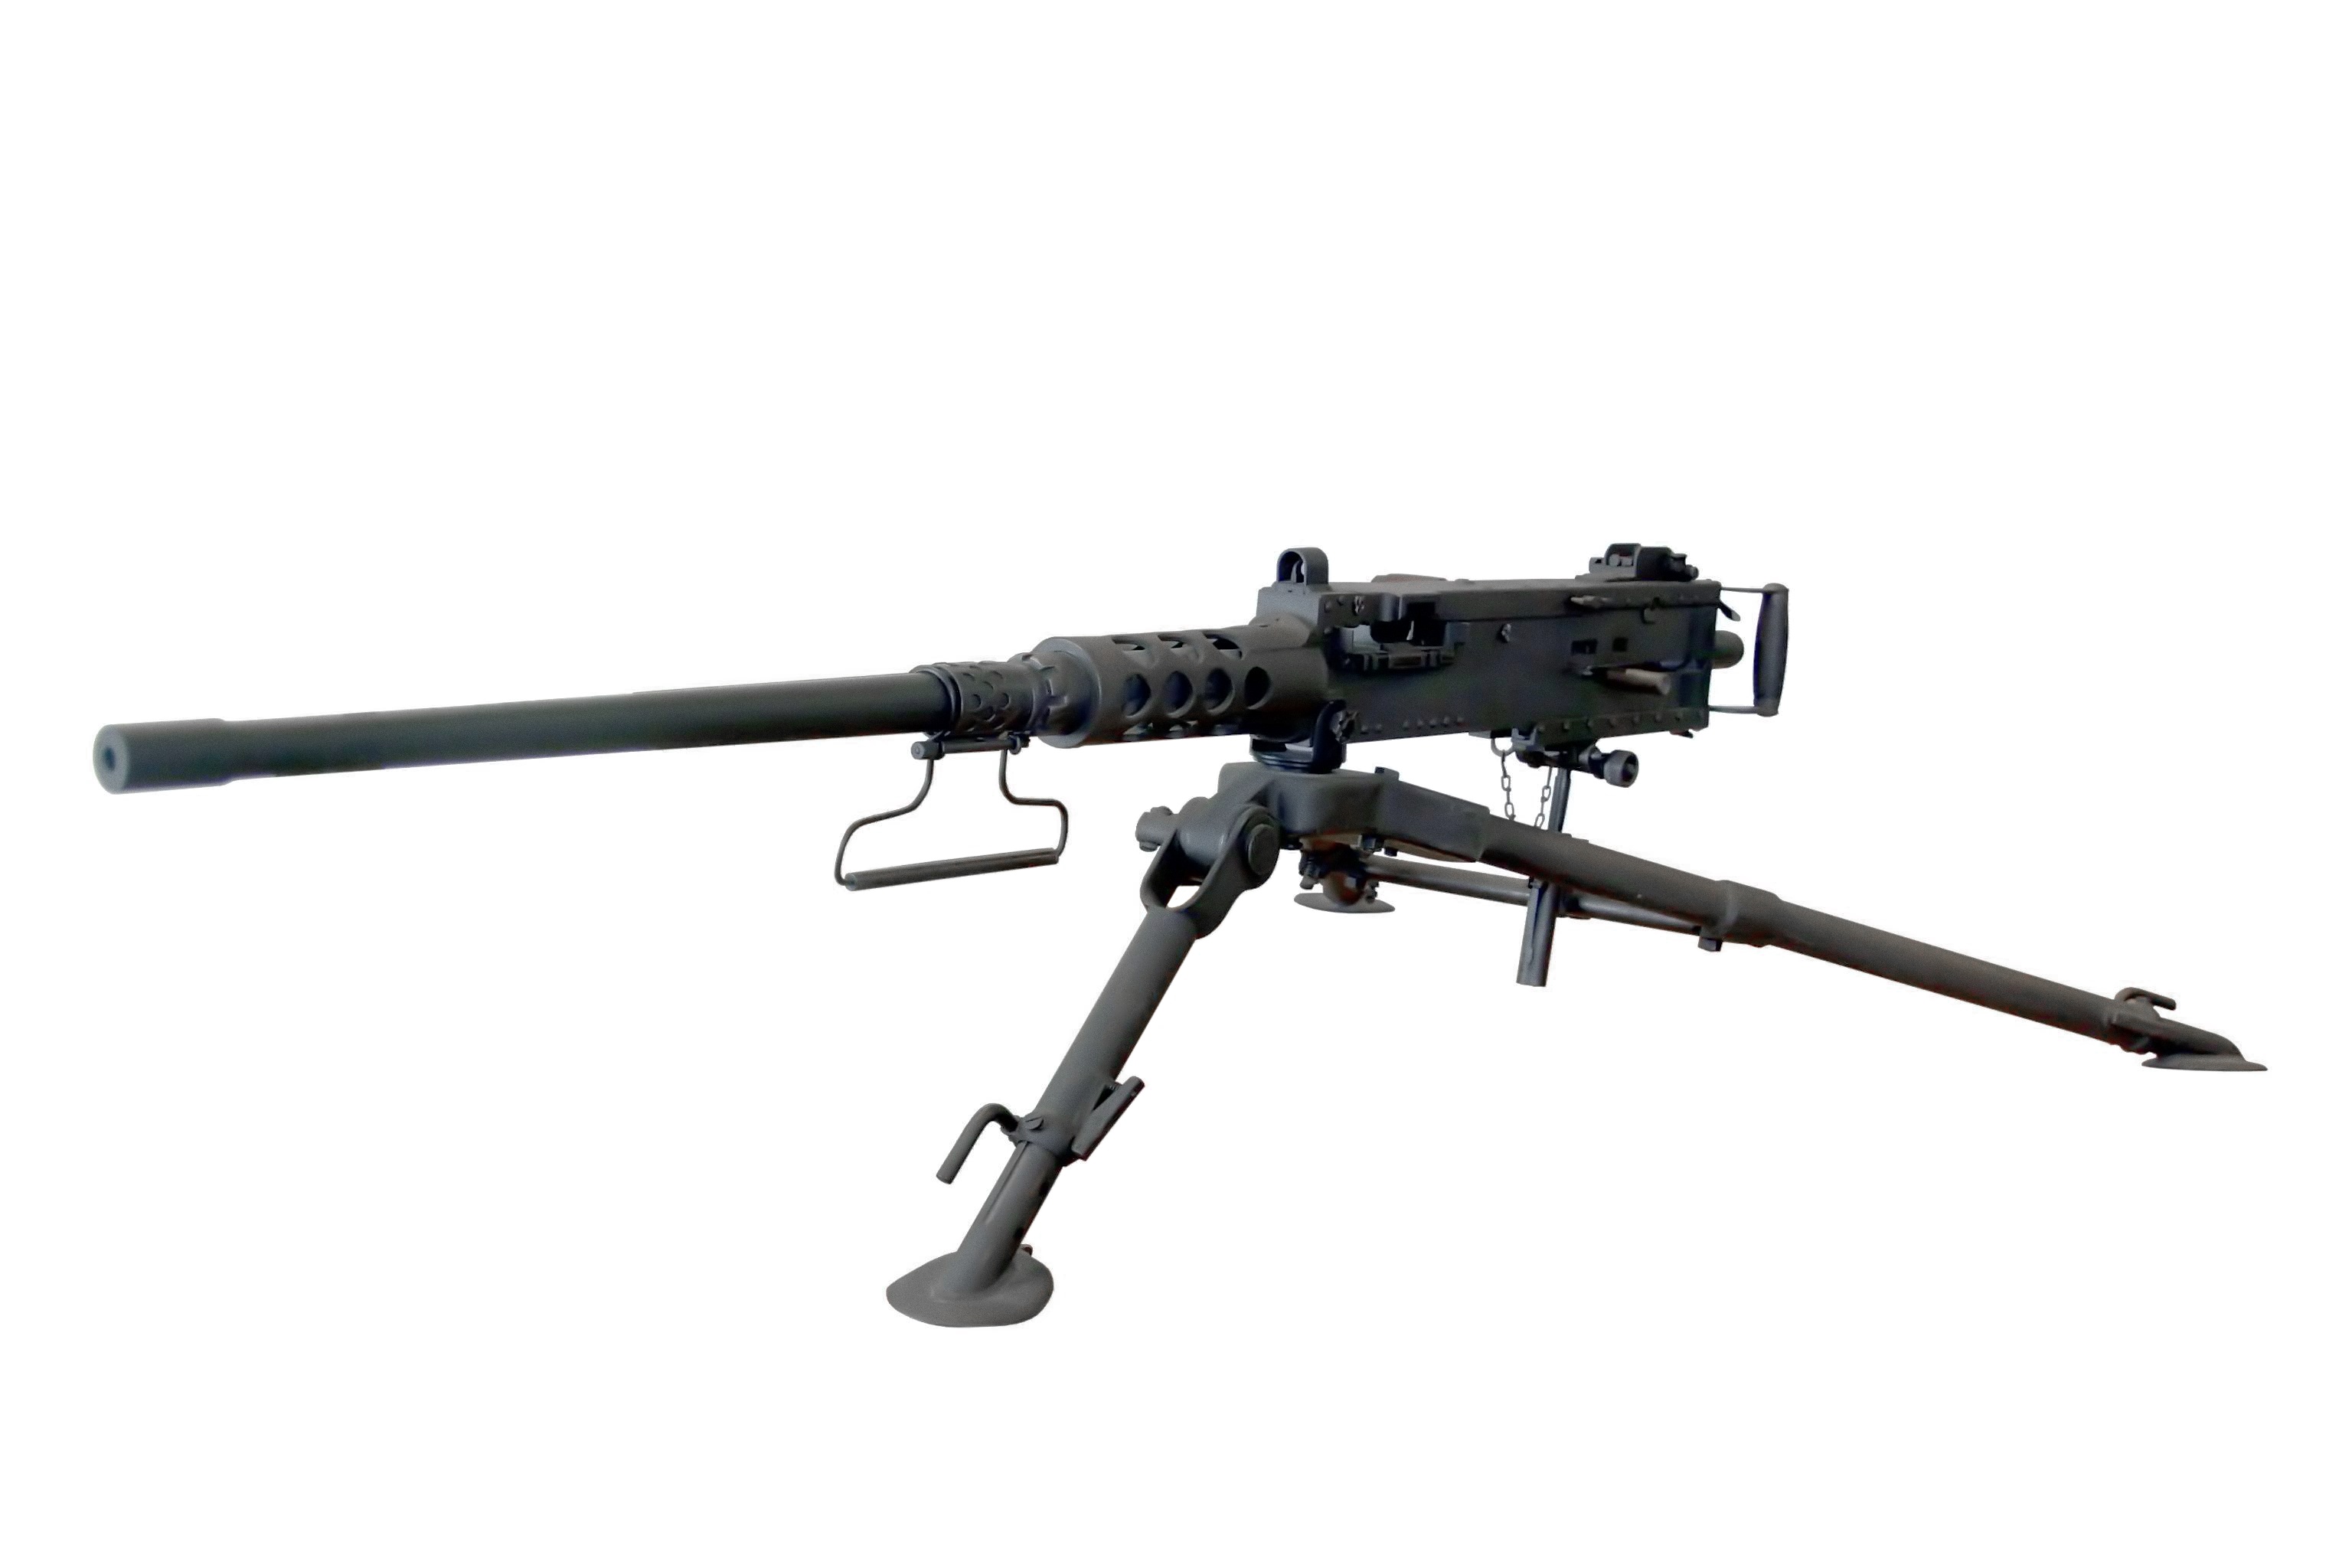         .50 Caliber (12.7x99mm) HMG
India's Main HMG 12.7x99mm (50Caliber) 'M2HB' HEAVY MACHINE GUN, Browning, USA. INDIAN ARMY HAS LIMITED NUMBER OF THE M2HB HMG. The Government of India & the Ministry of Defence (MOD), have been trying, since the 80's, to acquire a license, from the US, to manufacture this Browning HMG, with LINKED BELT FEED, in large quantities; one for every Army COMPANY (120 soldiers)